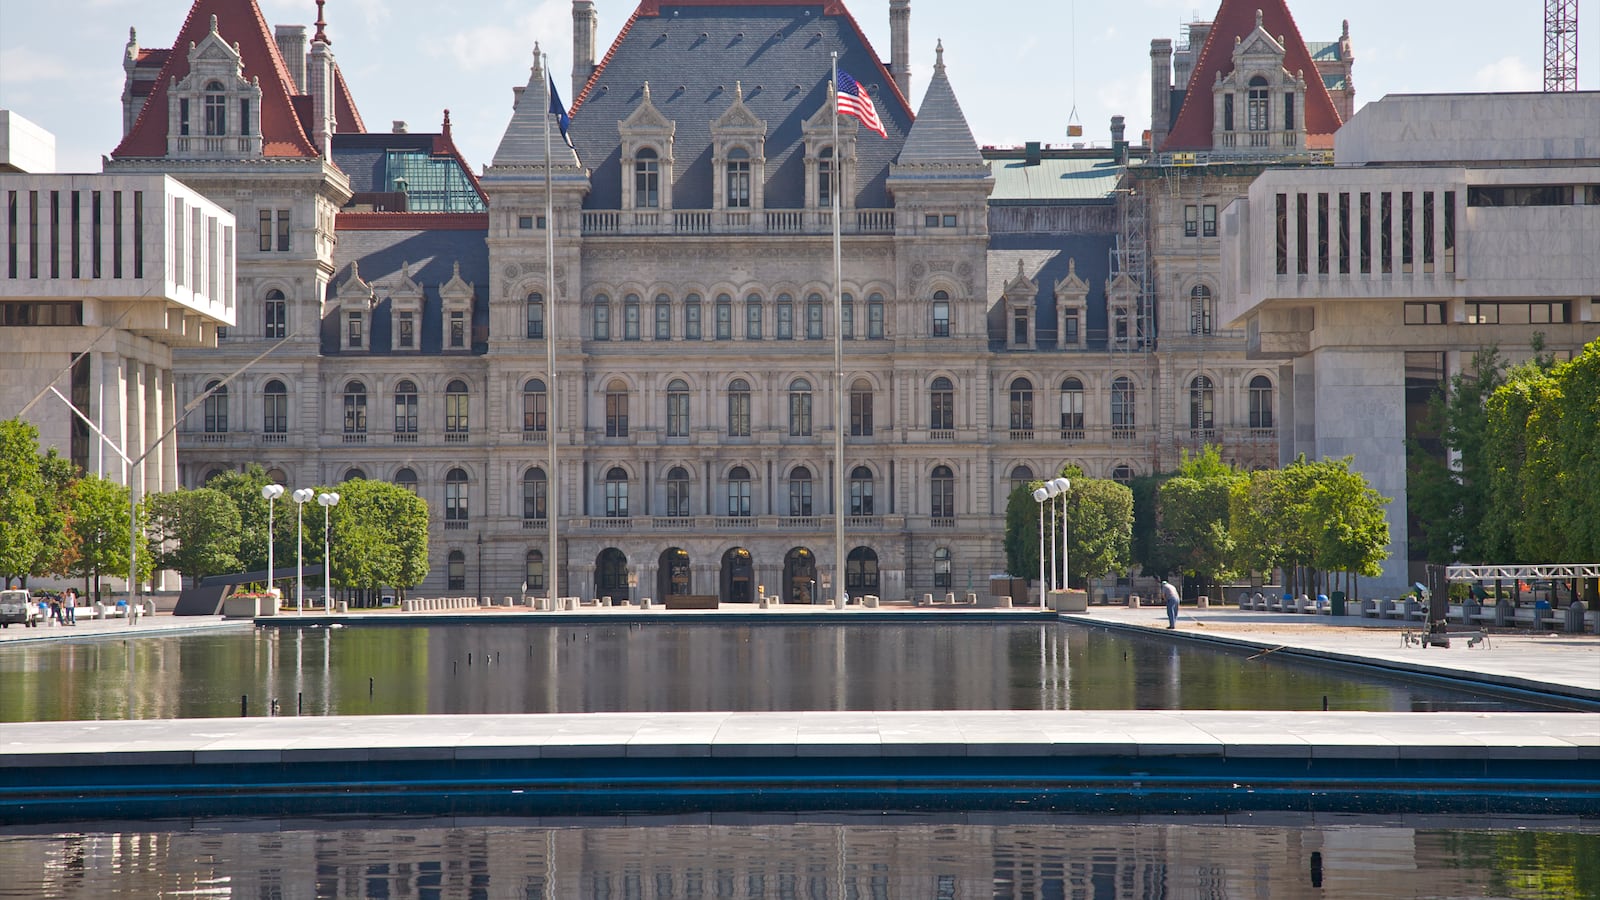 The exterior of the New York State Capitol with a pond in the foreground.